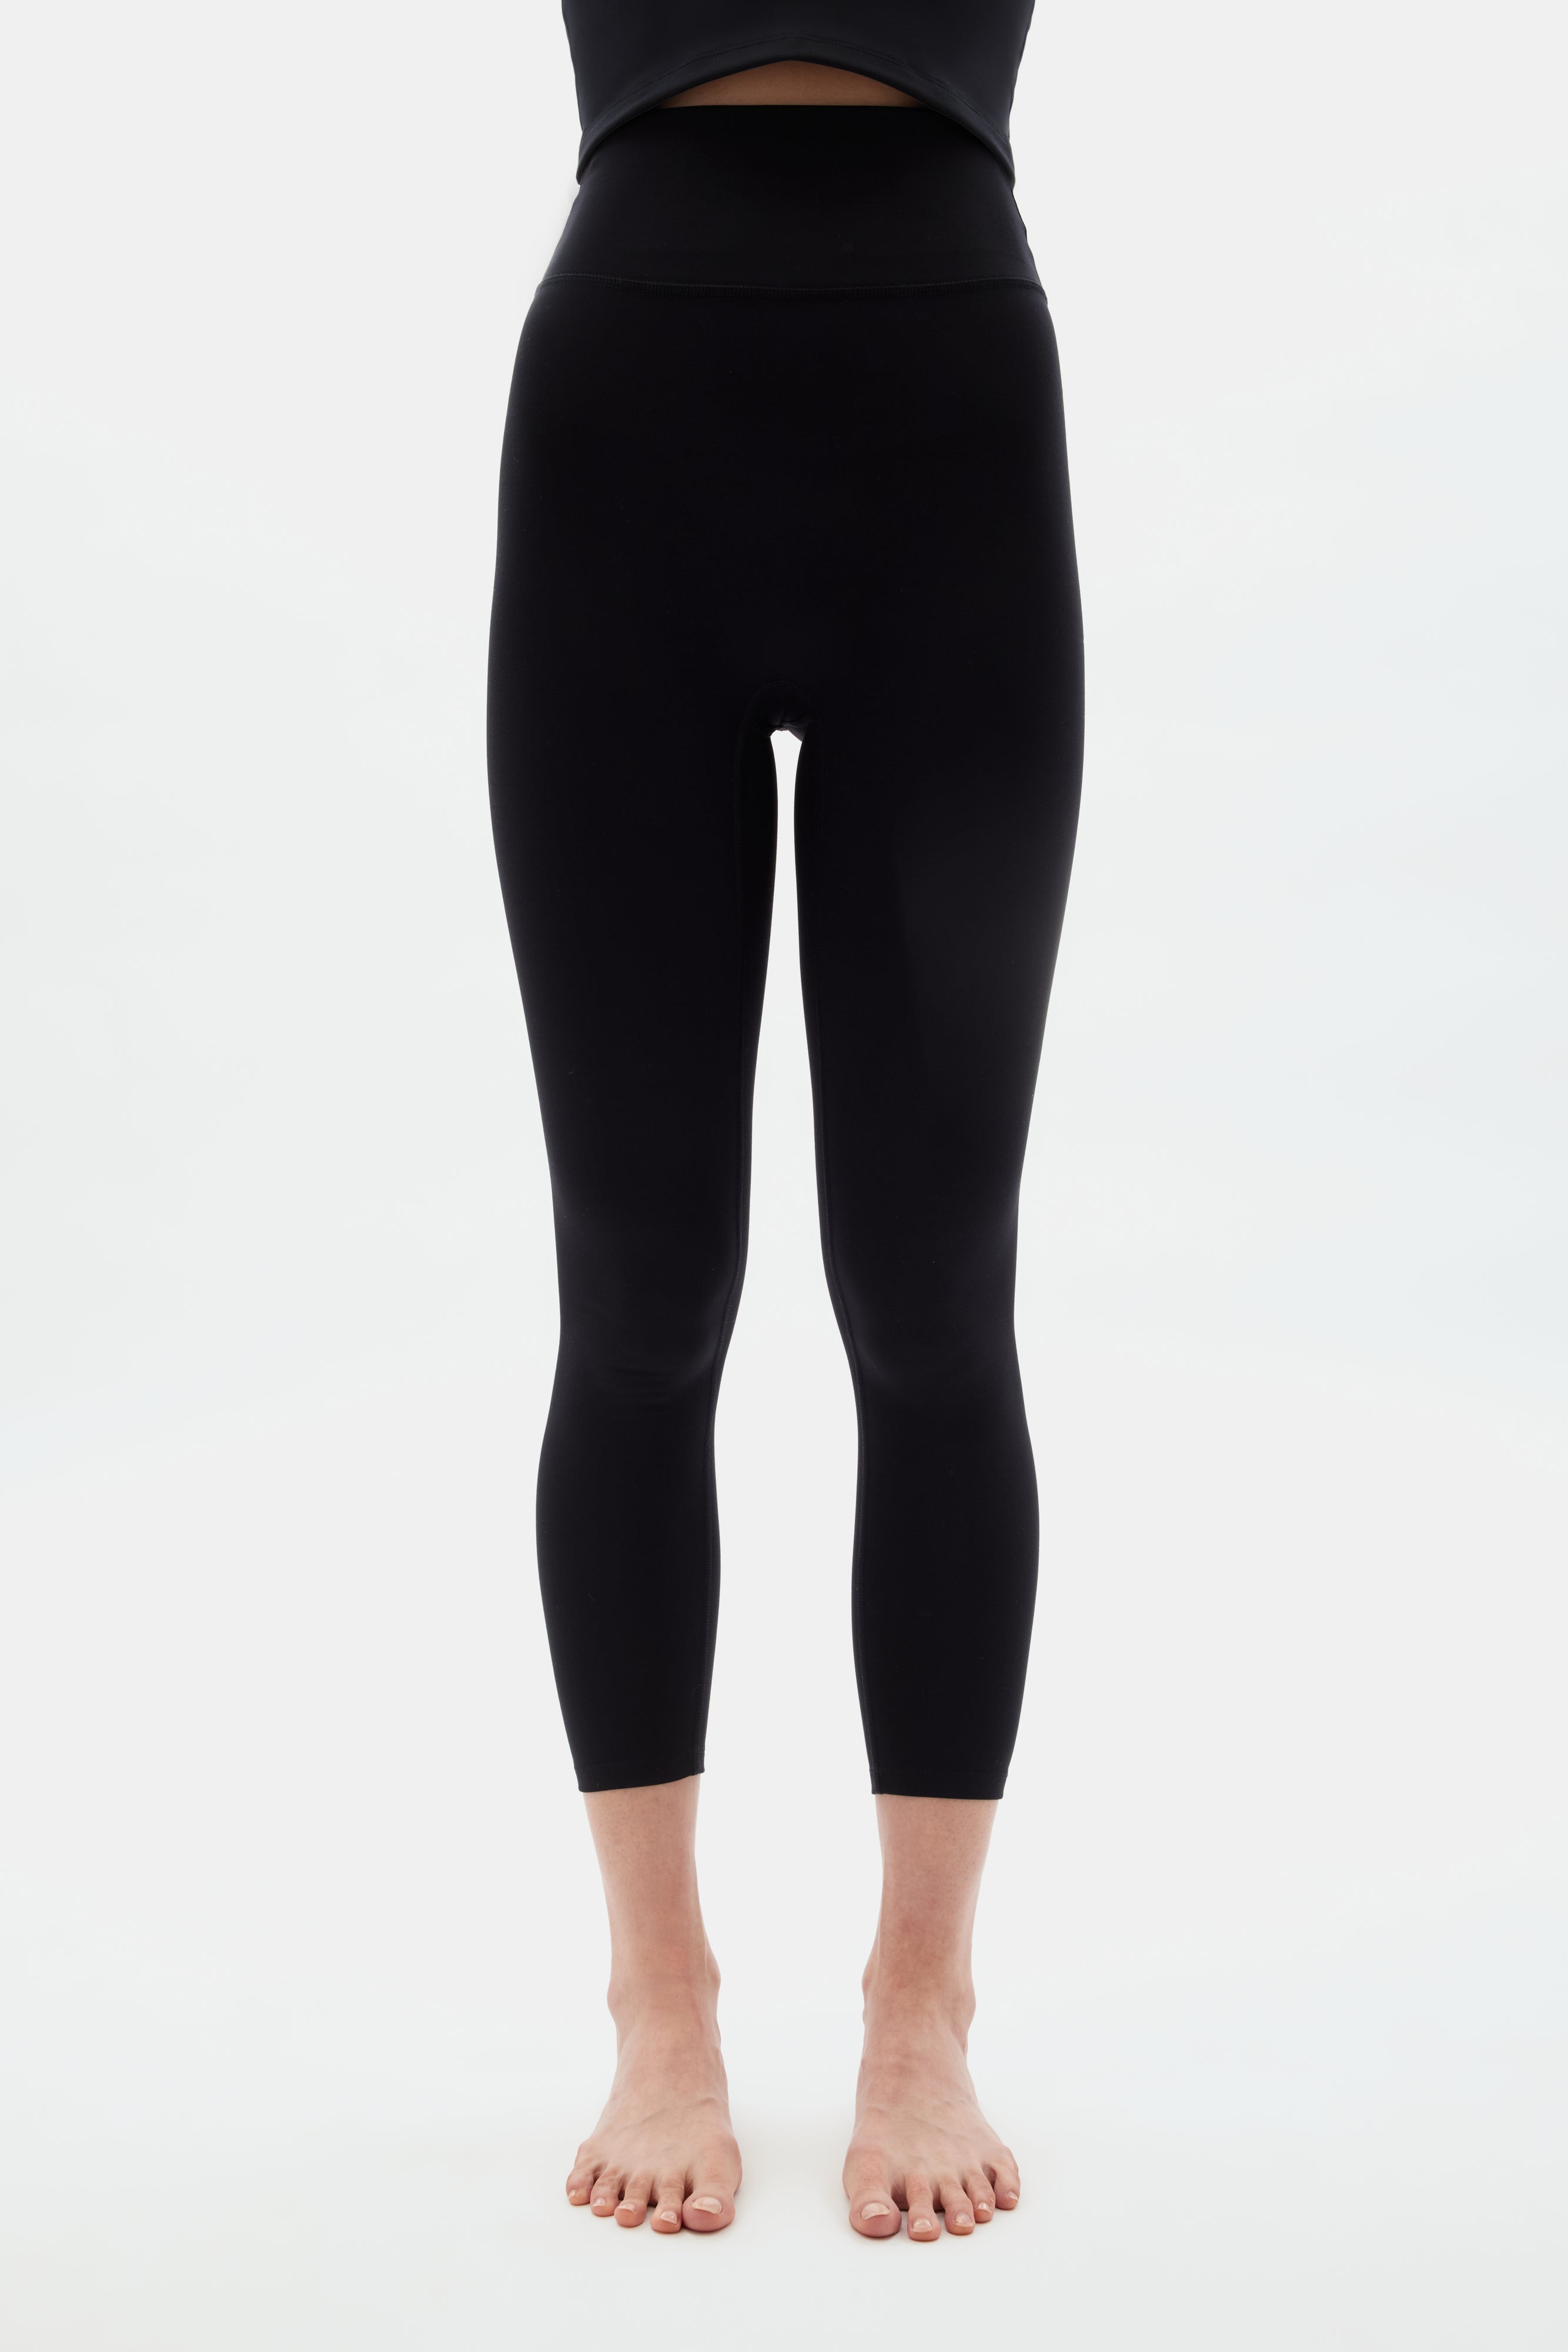 Simply Soft Luxe Long Legging - Silver Black Stars